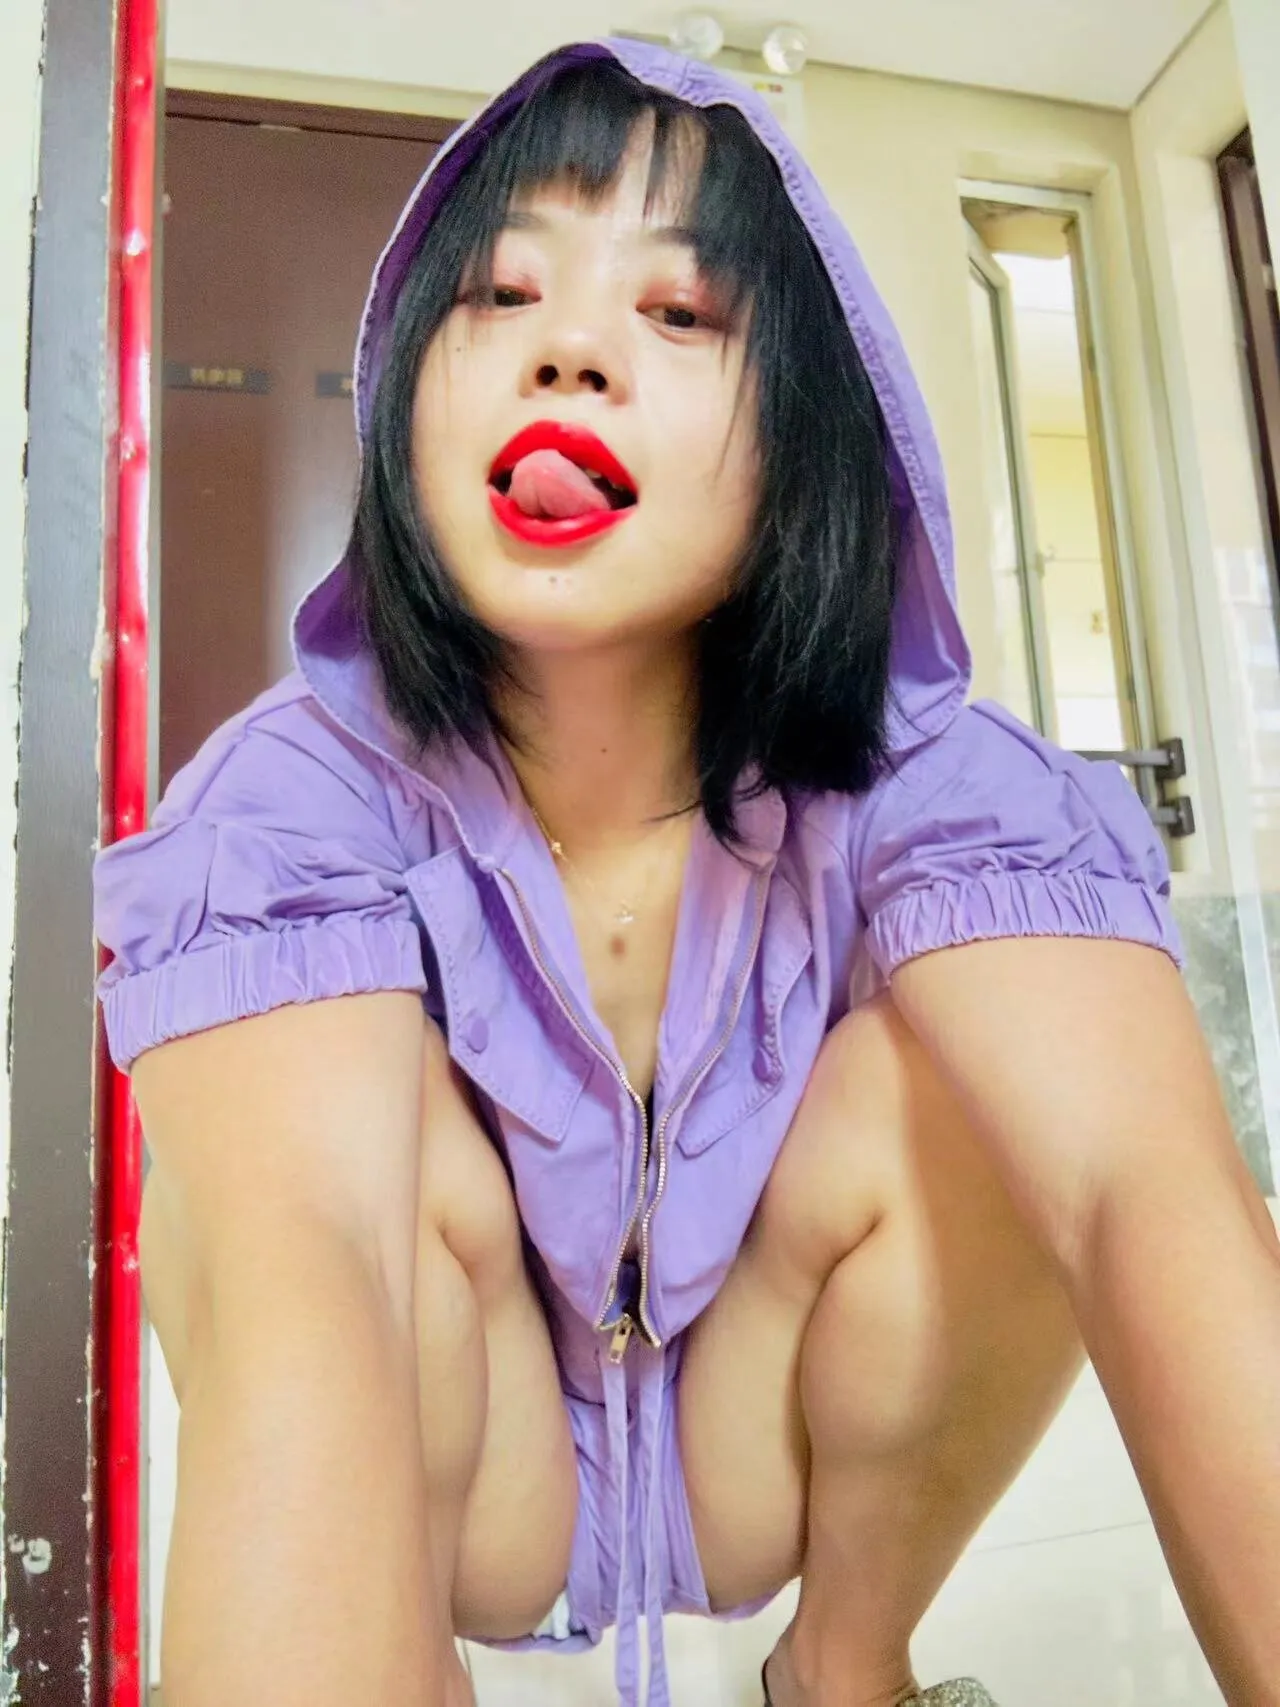 Game_yoyo, 24 years Old Asian Cam Girl From Hong Kong on StripChat